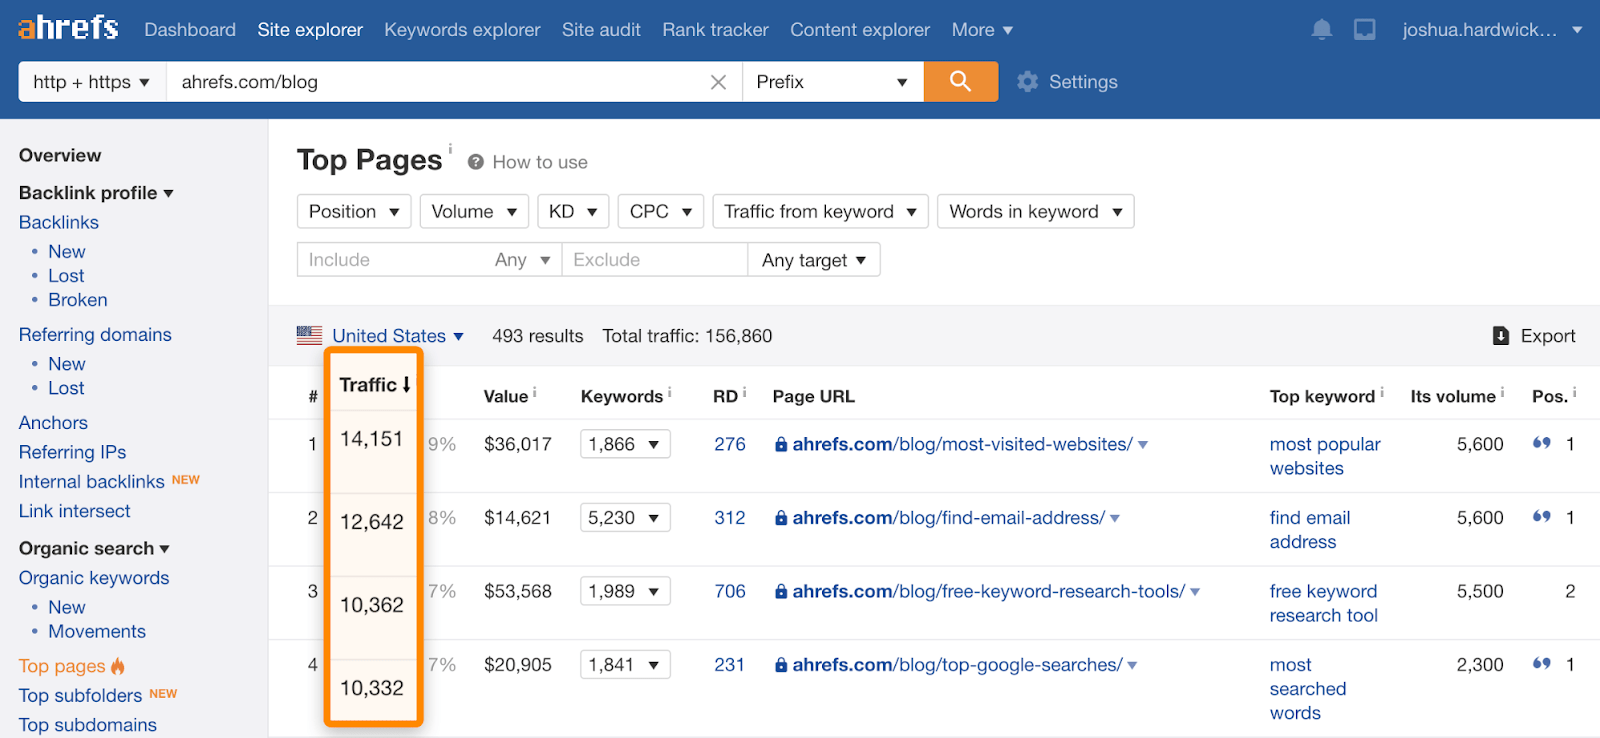 4 ahrefs blog top pages